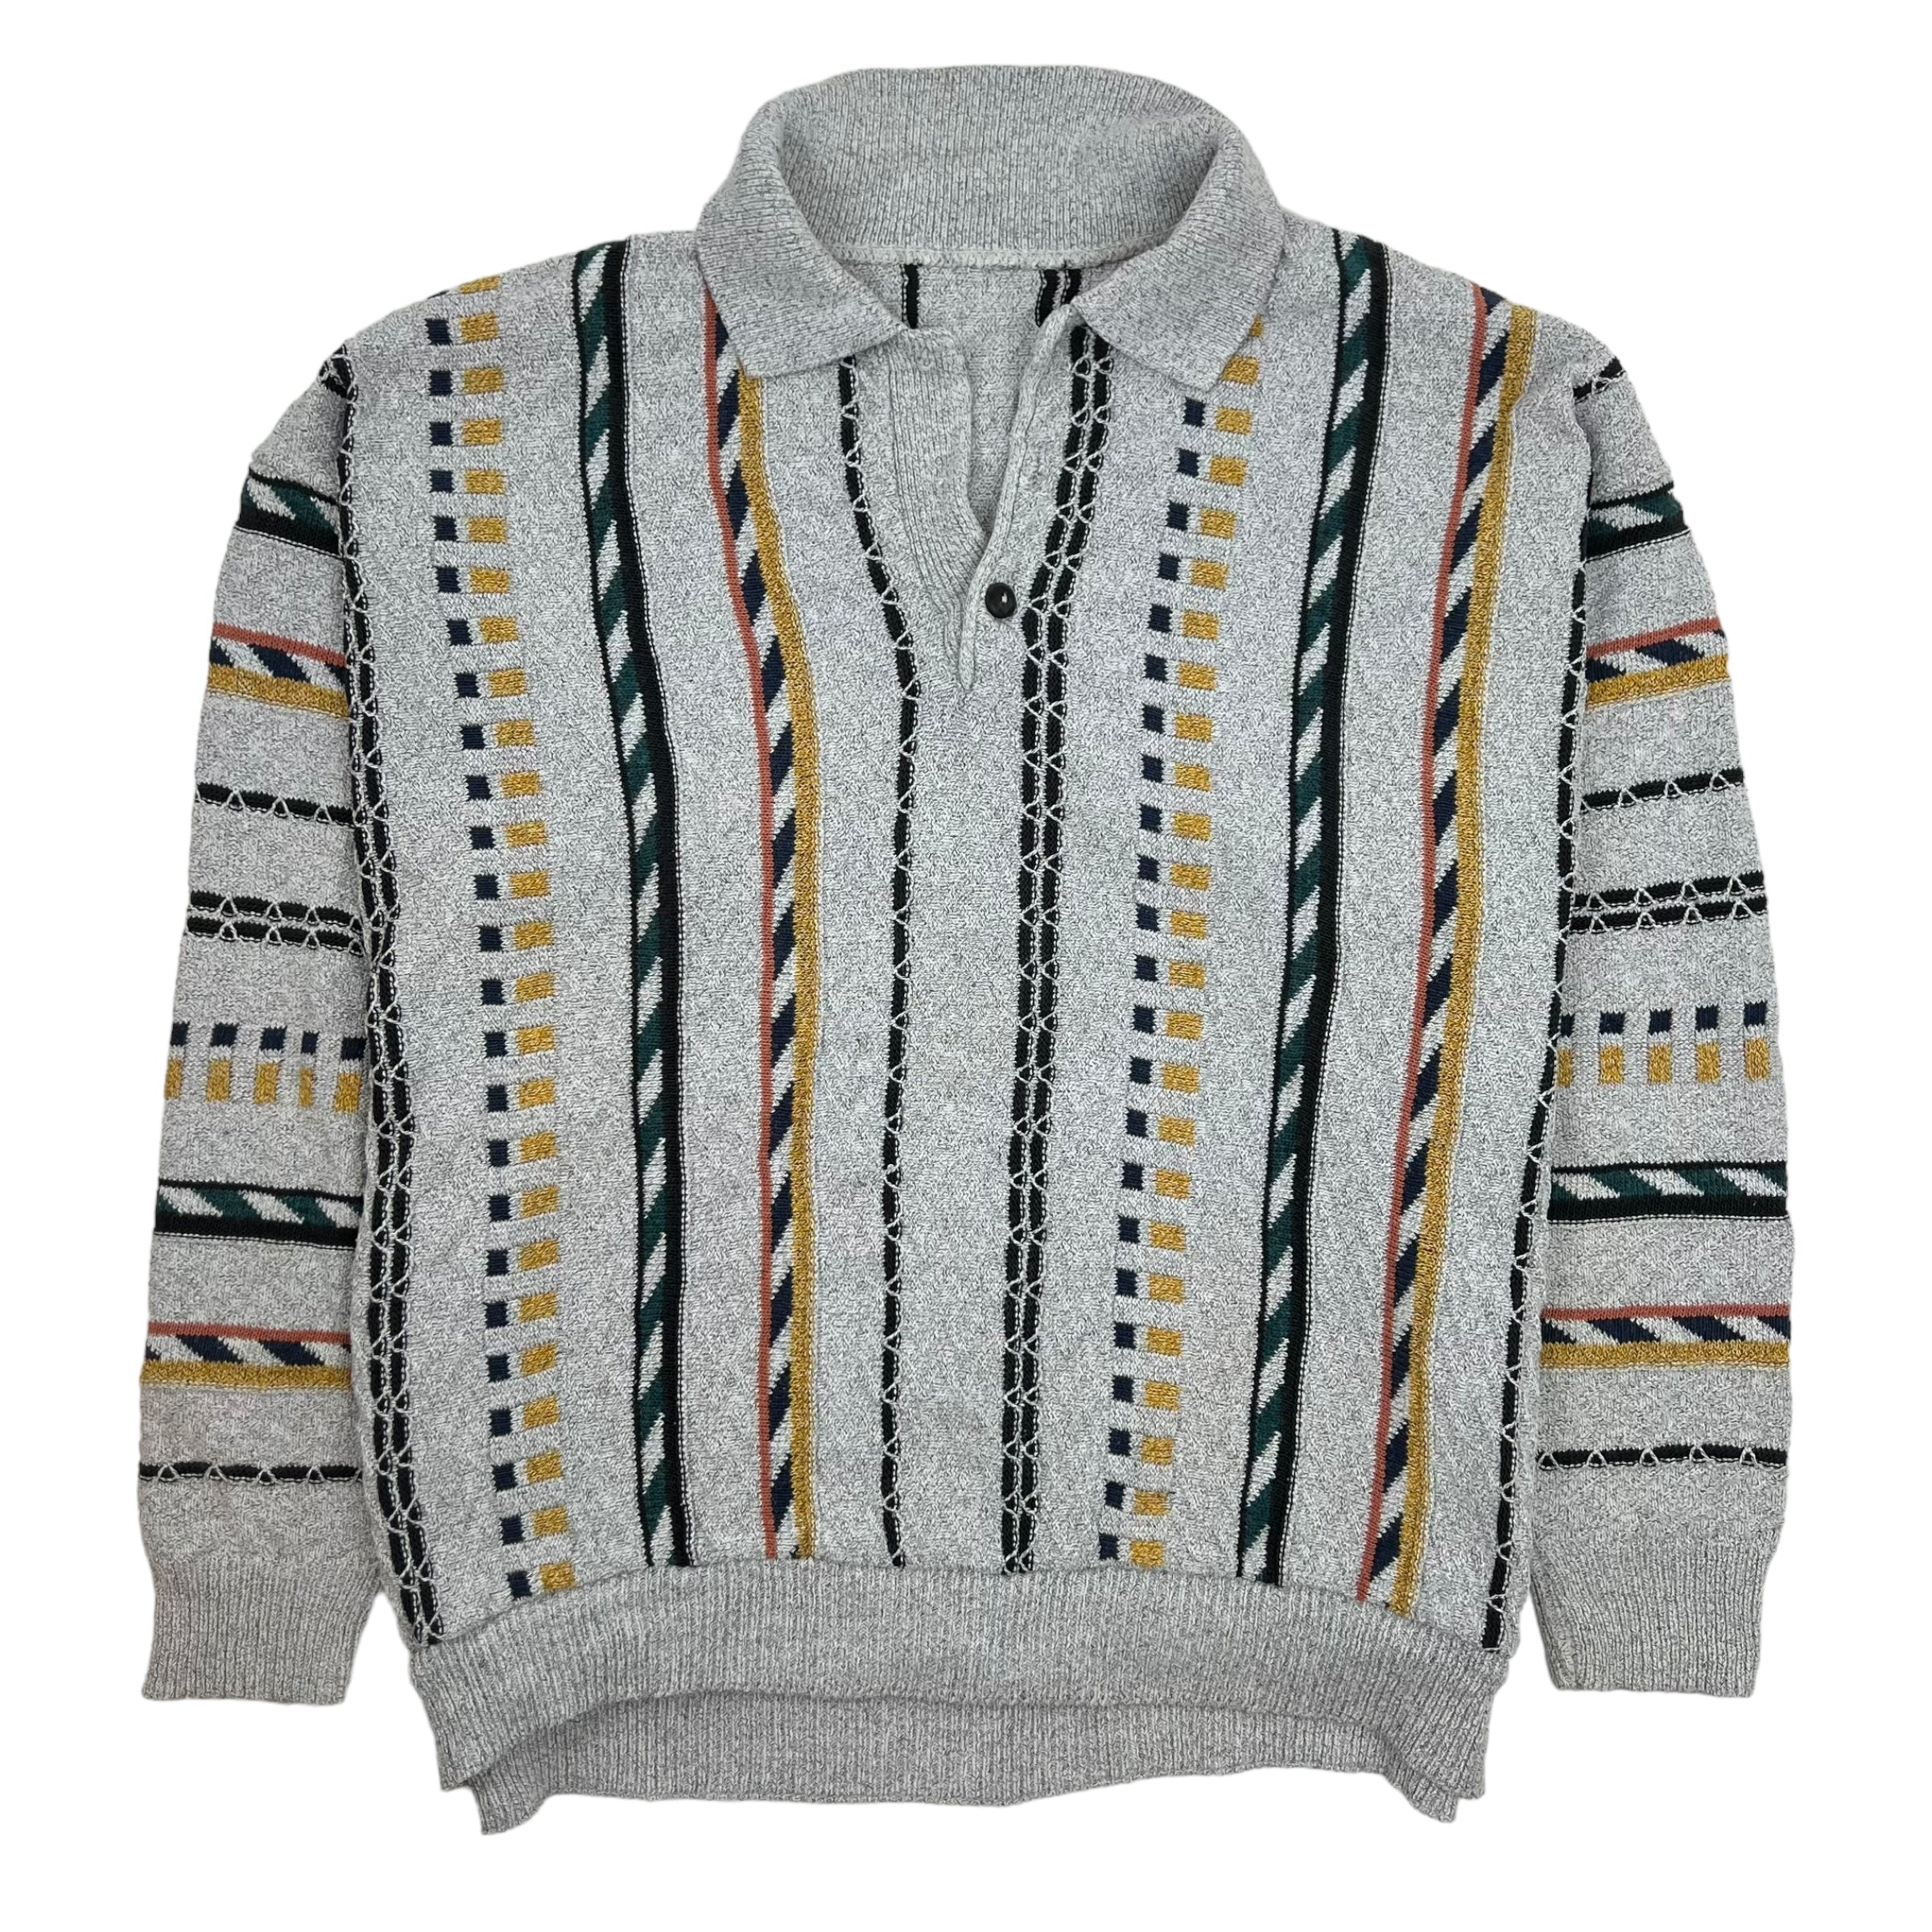 Vintage Knit Rugby Sweater Grey